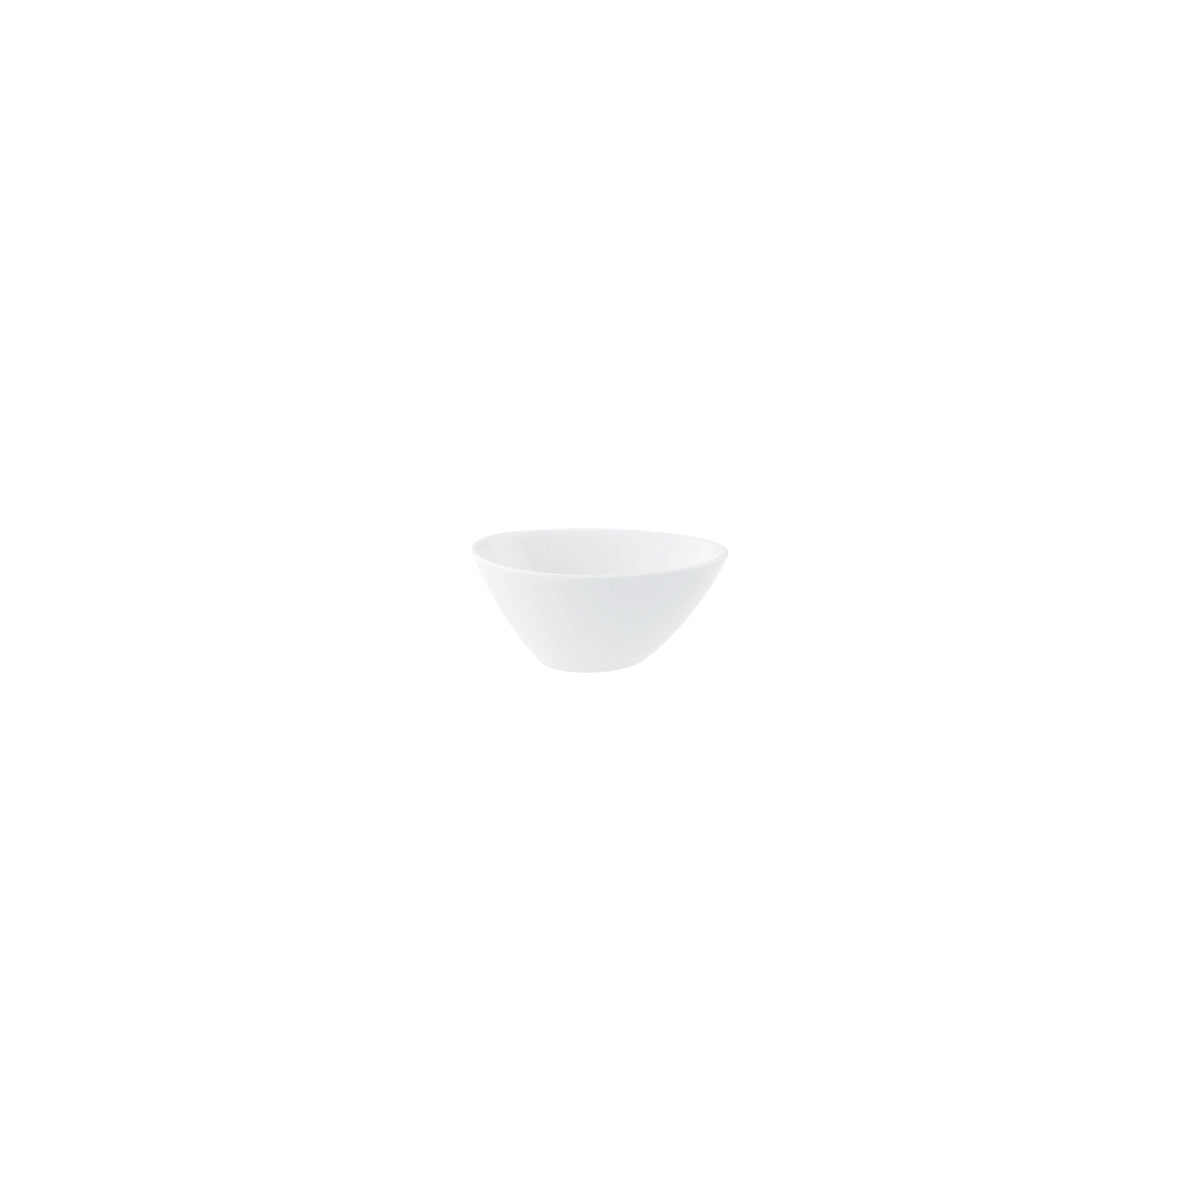 VB16-3275-3831 Villeroy And Boch Villeroy And Boch Marchesi White Bowl 100x75mm / 100ml Tomkin Australia Hospitality Supplies